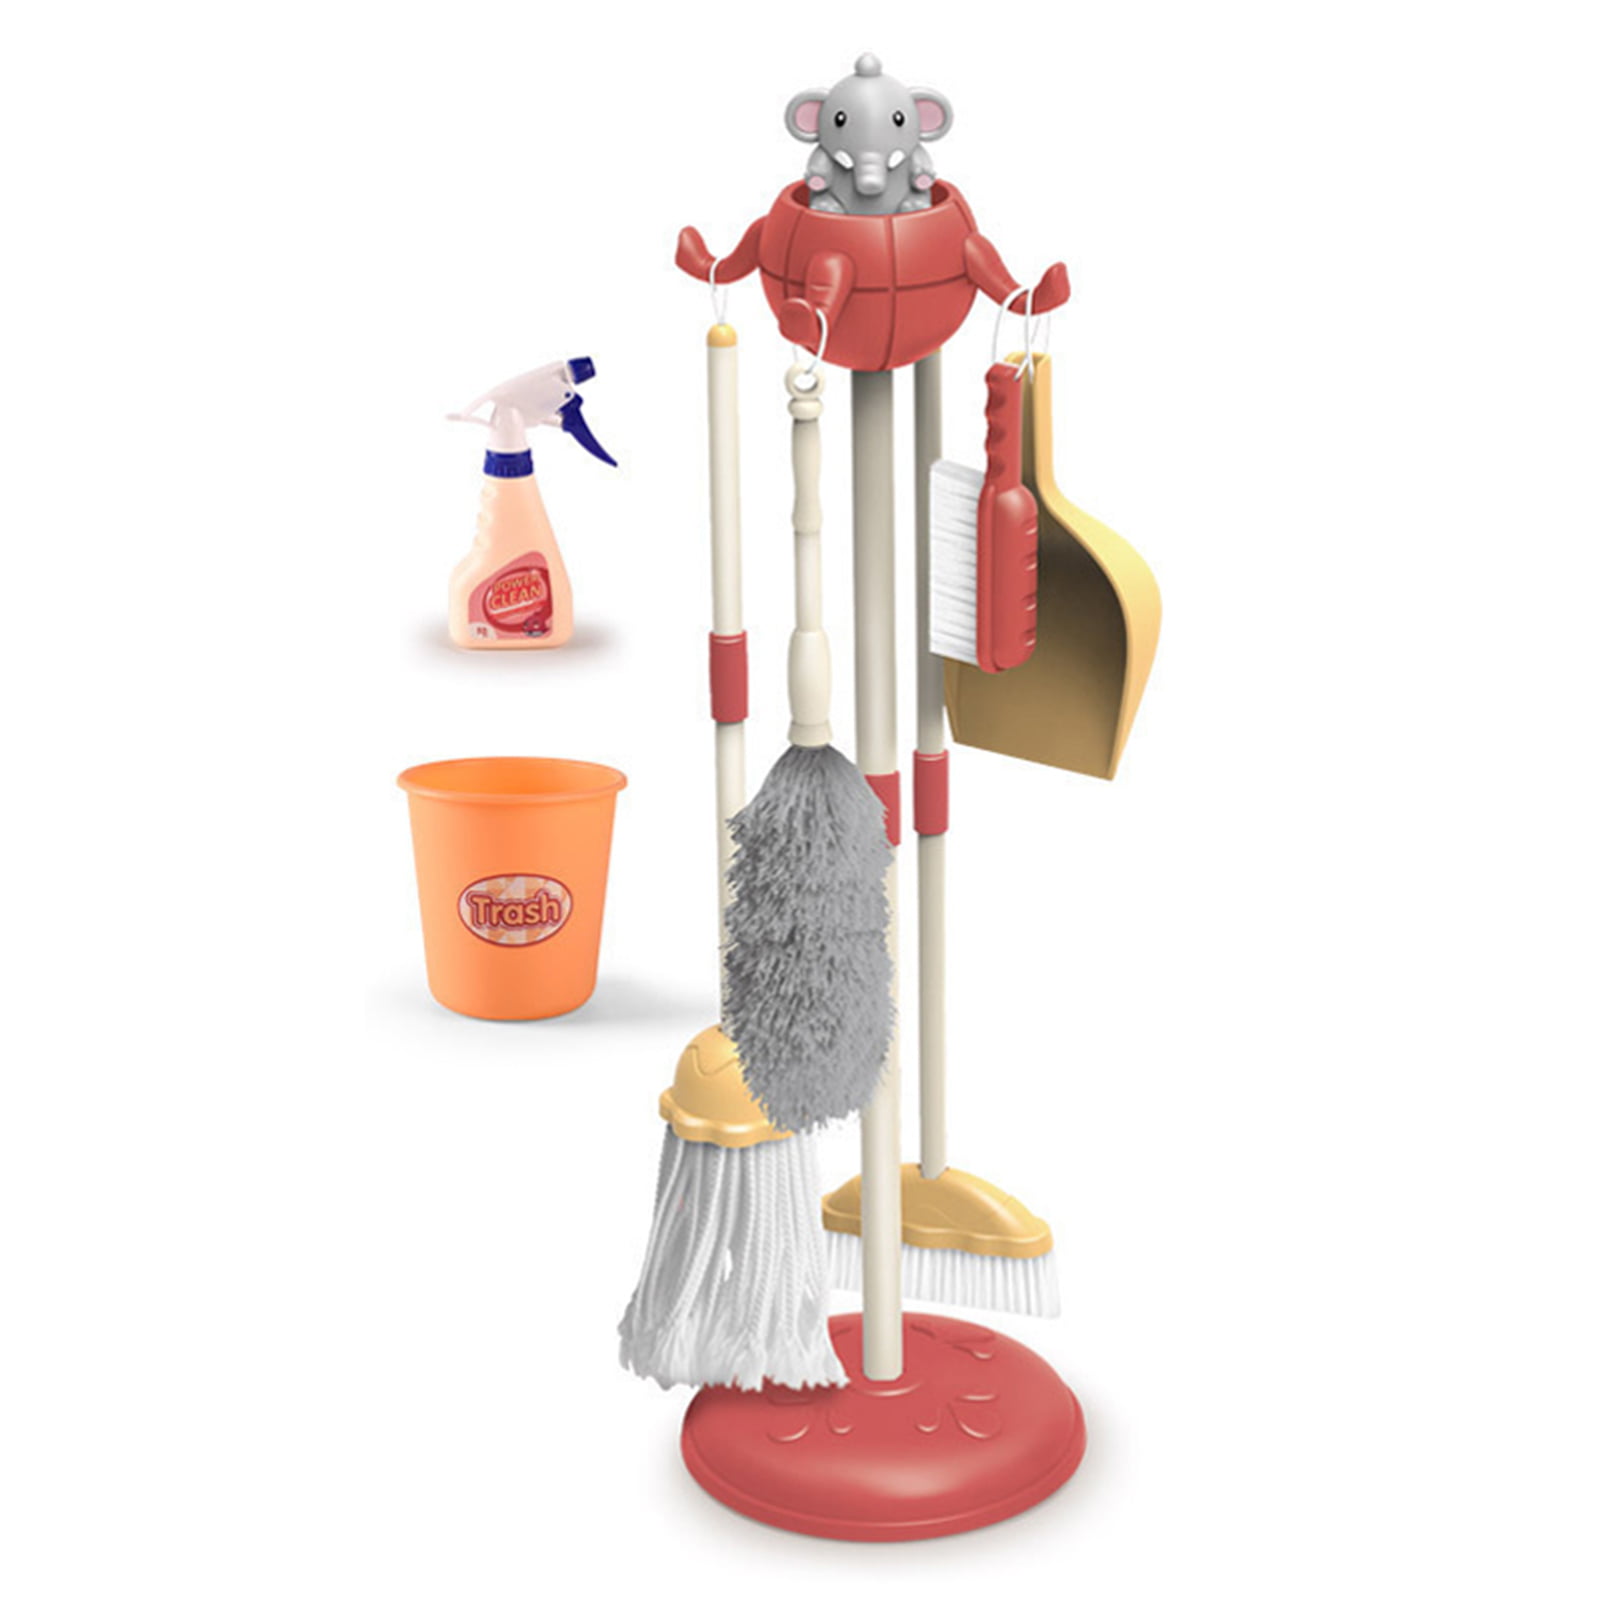 Kids Children's Cleaning Role Play Toy Mop & Bucket Set Red Girls Xmas Gift New 